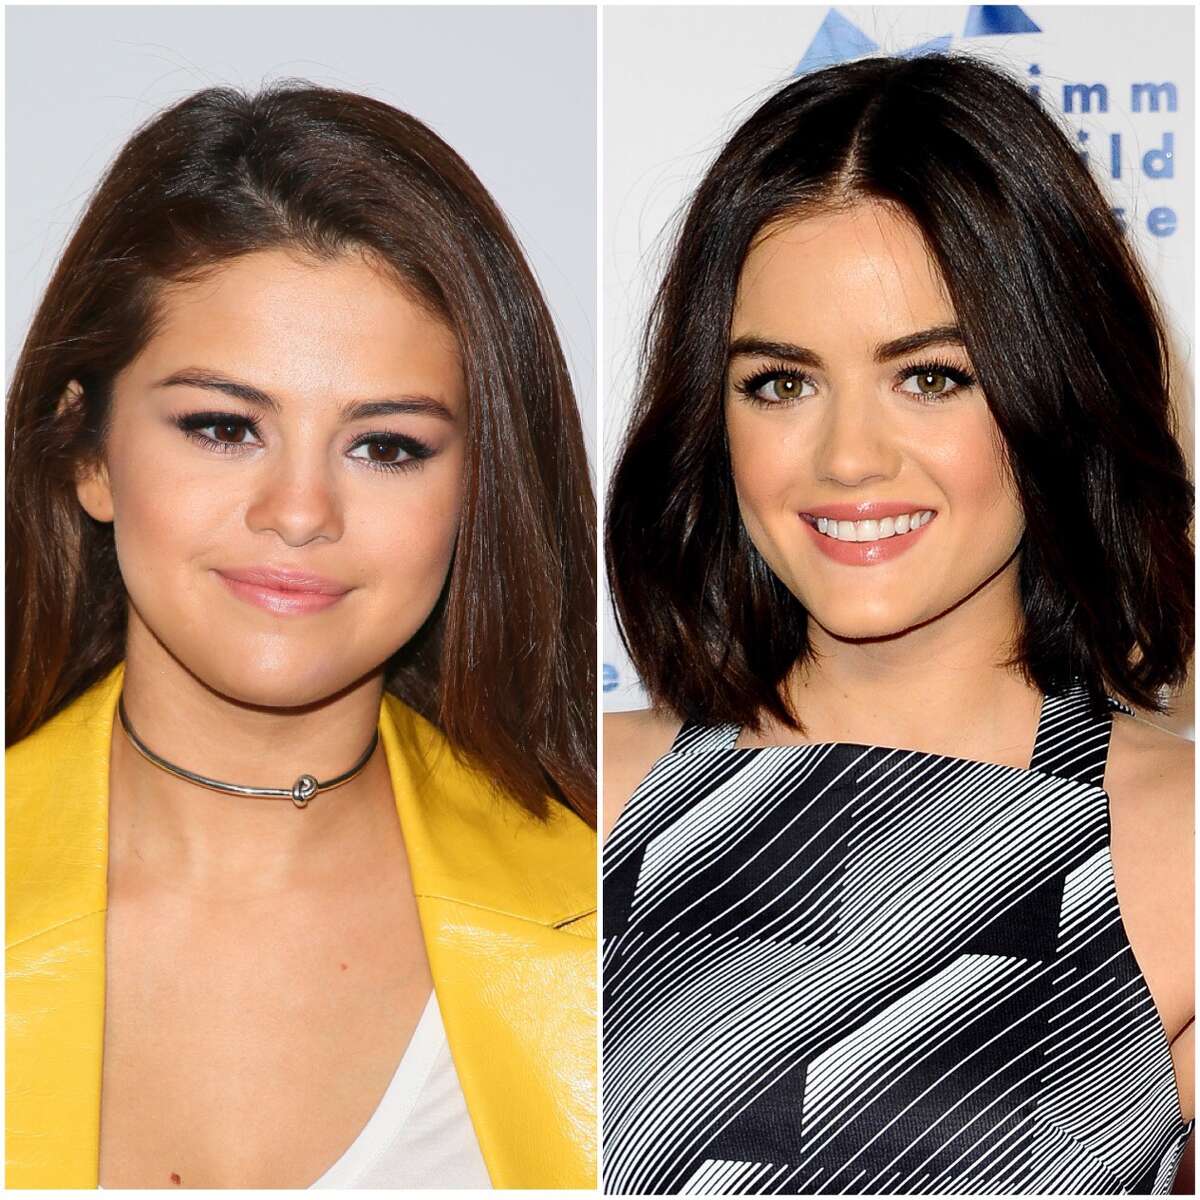 Selena Gomez and Lucy Hale  Both stars have found stardom in popular teen shows and are singers too. There are too many things that are commonly shared between the two. Image source: Getty images JB Lacroix | Getty images Allen Berezovsky